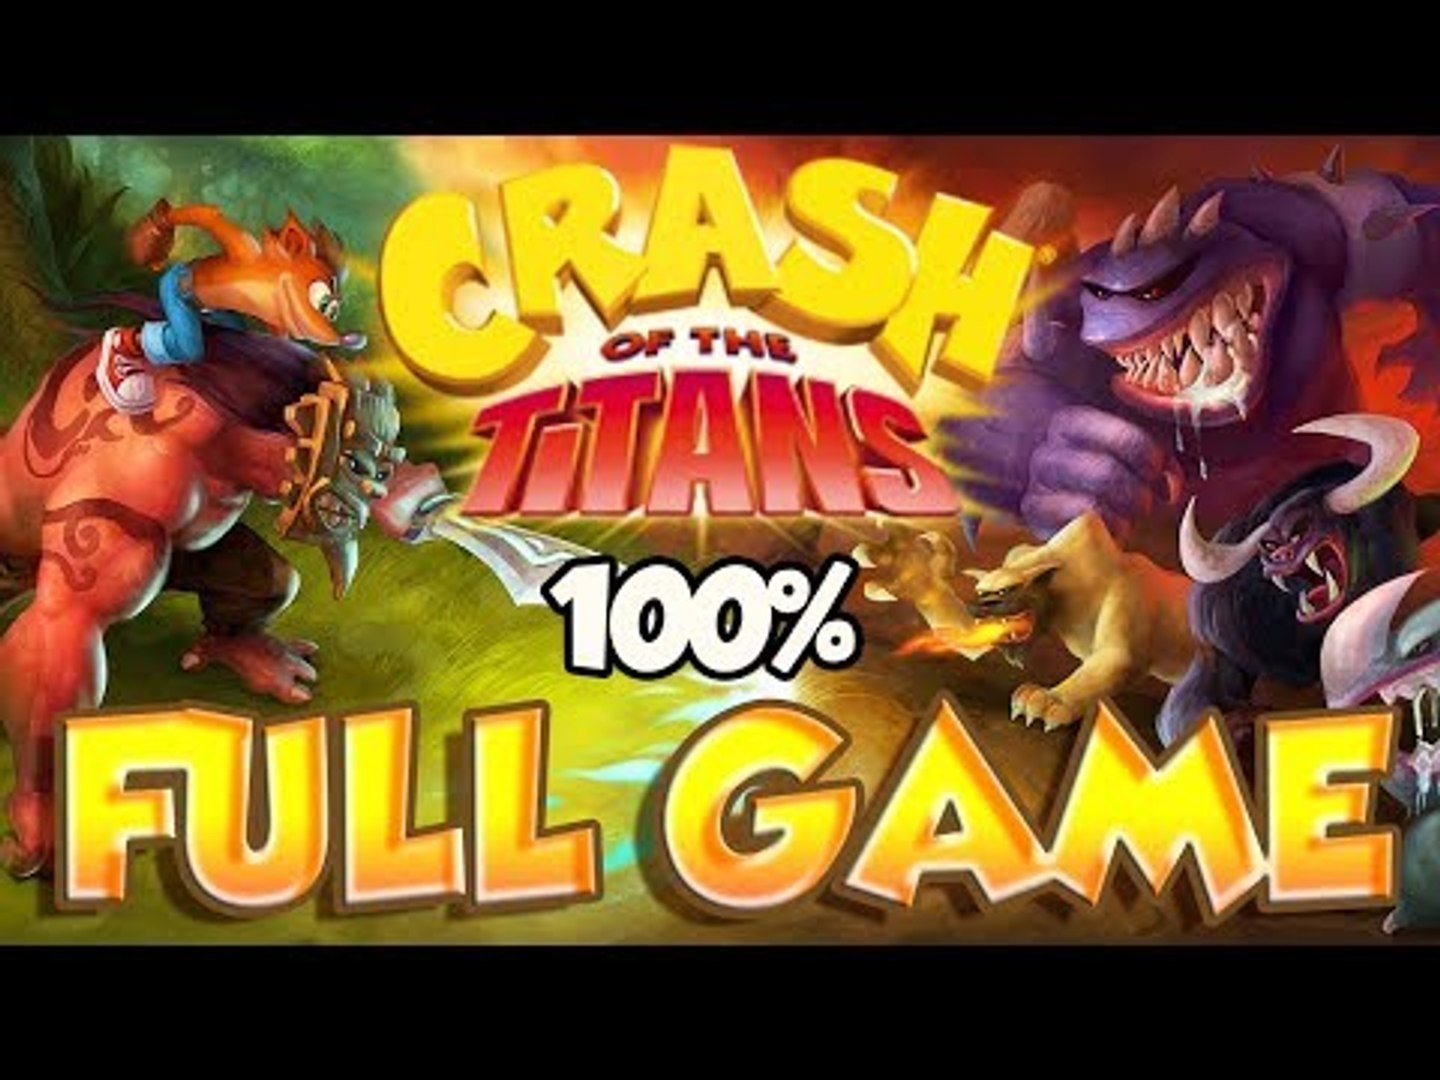 Crash of the Titans FULL GAME 100% Longplay (X360, PS2, Wii, PSP) - video  Dailymotion